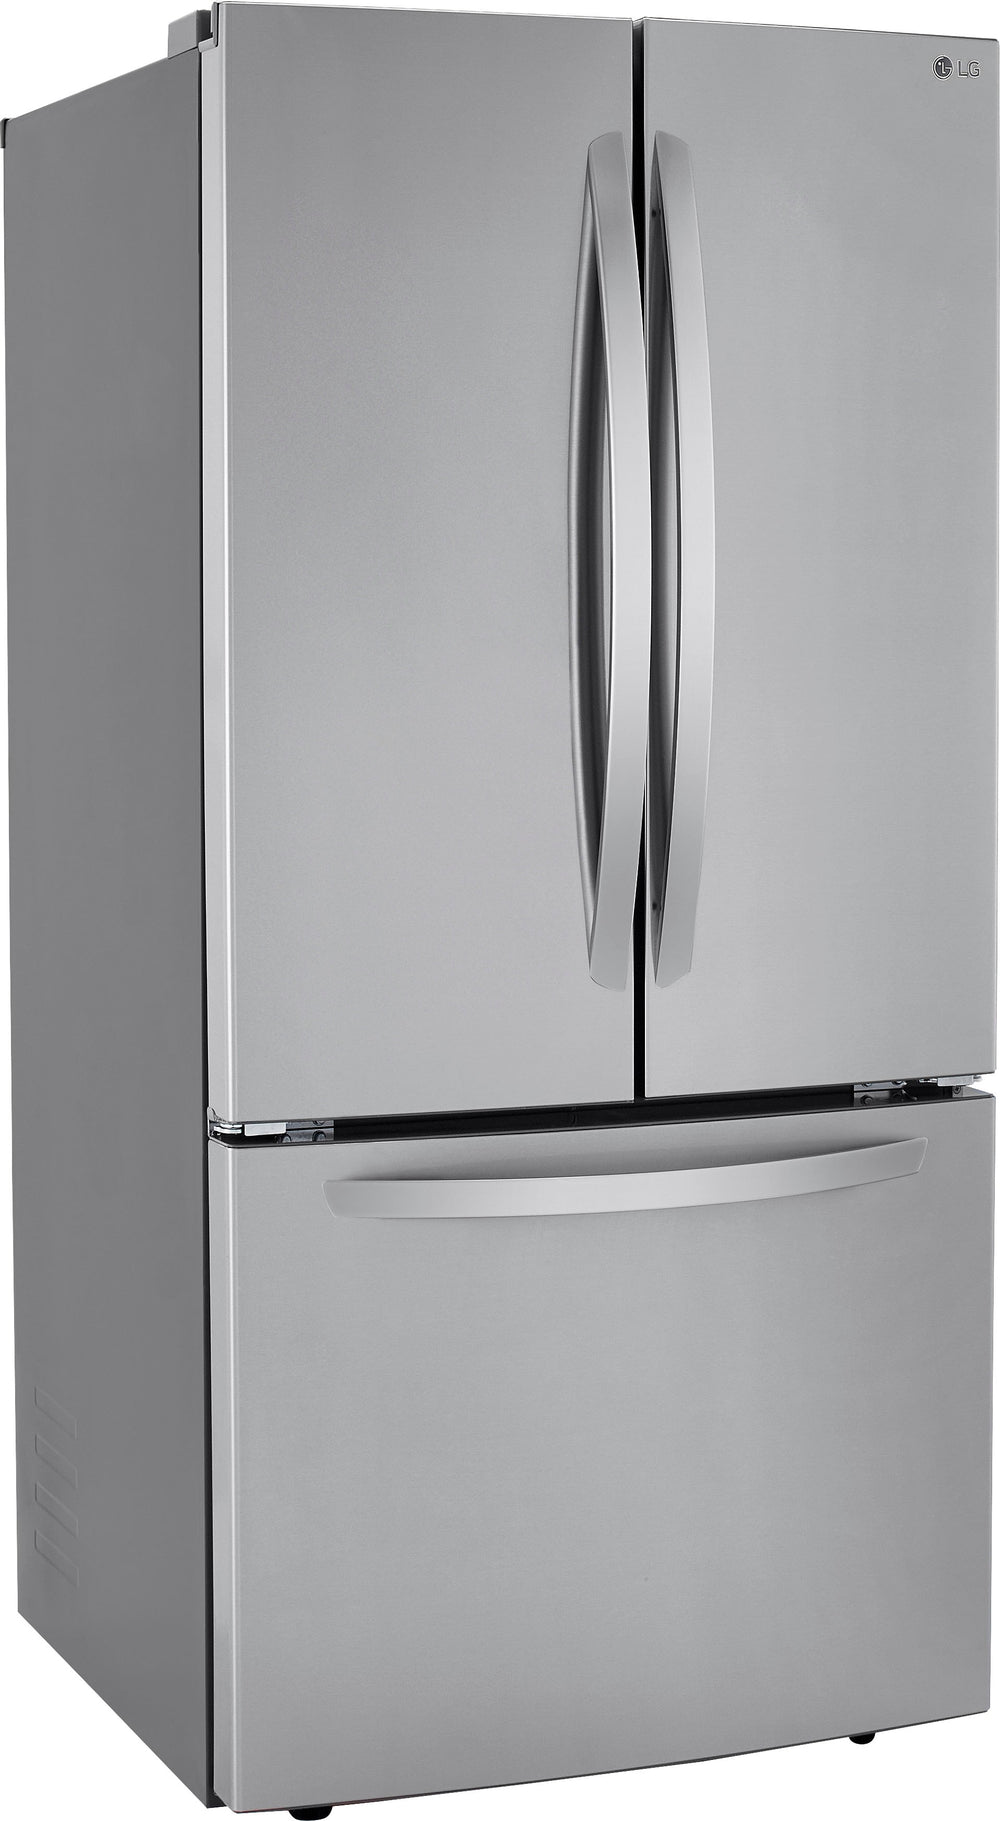 LG - 25.1 Cu. Ft. French Door Refrigerator with Ice Maker - Stainless steel_1